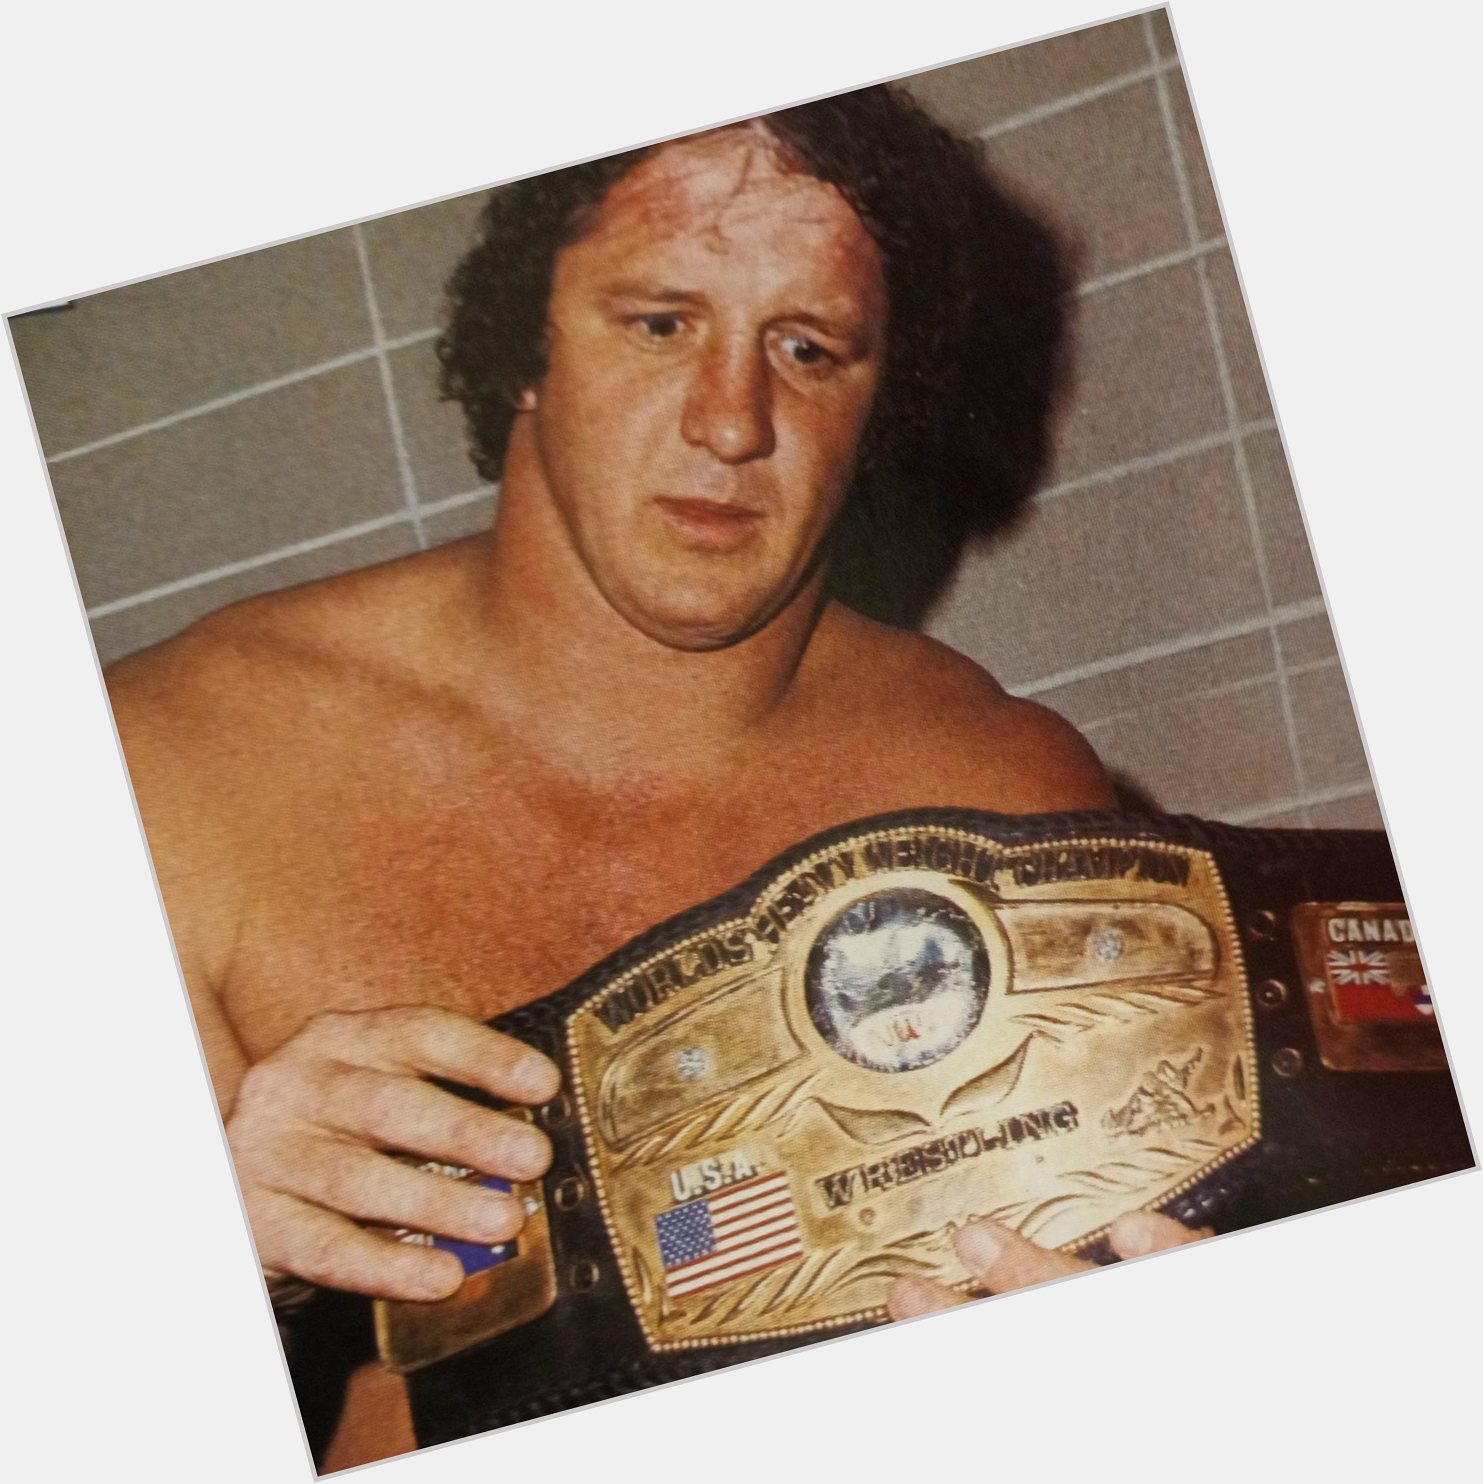 Happy 77th Birthday to one of the greatest of all time, Terry Funk! 